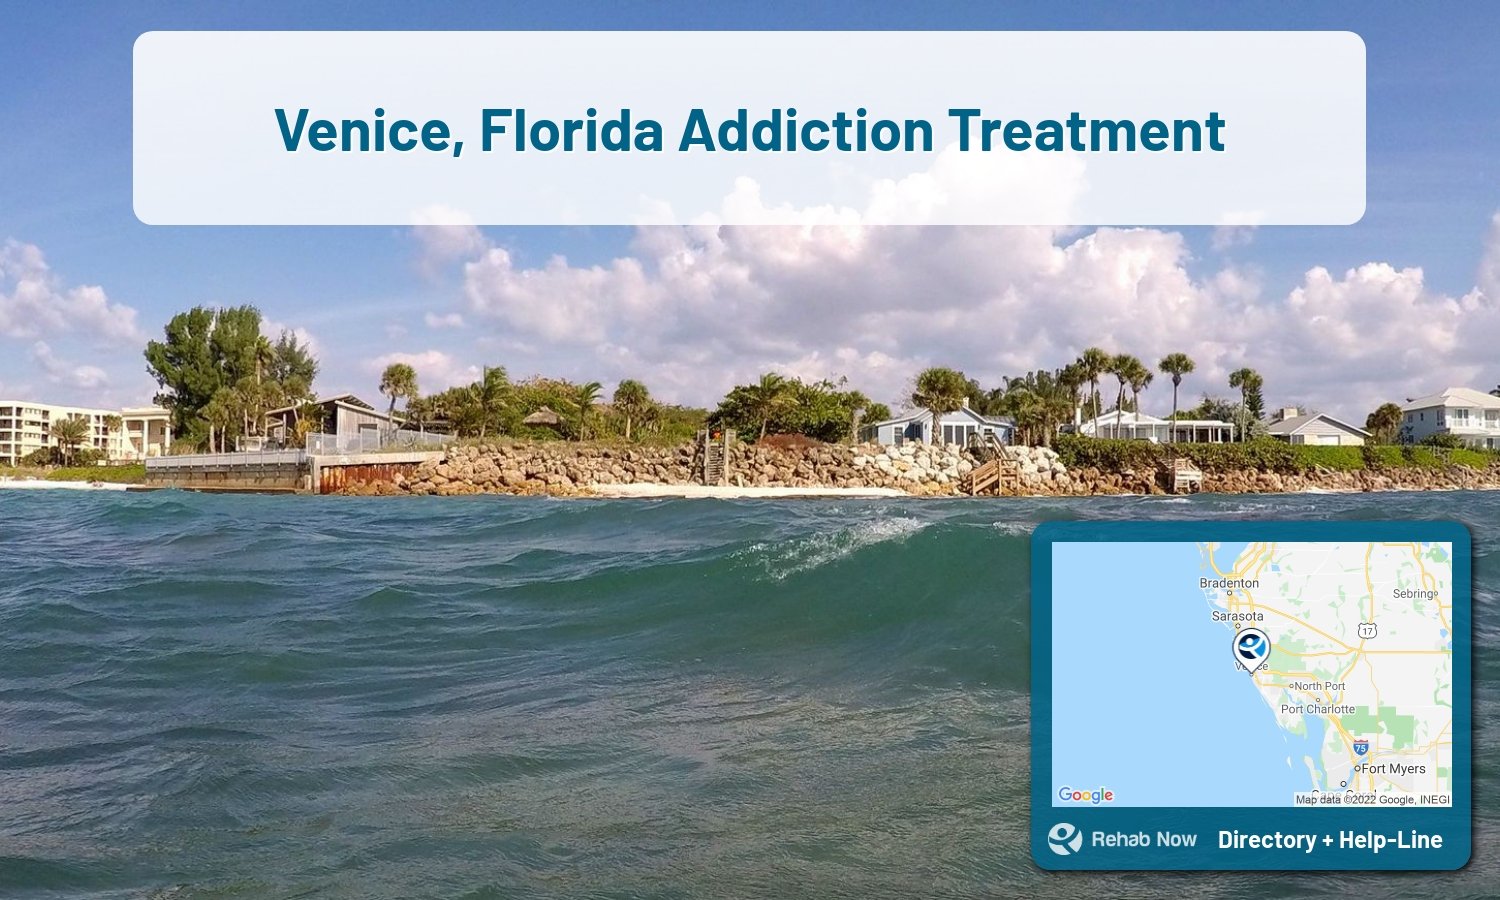 View options, availability, treatment methods, and more, for drug rehab and alcohol treatment in Venice, Florida